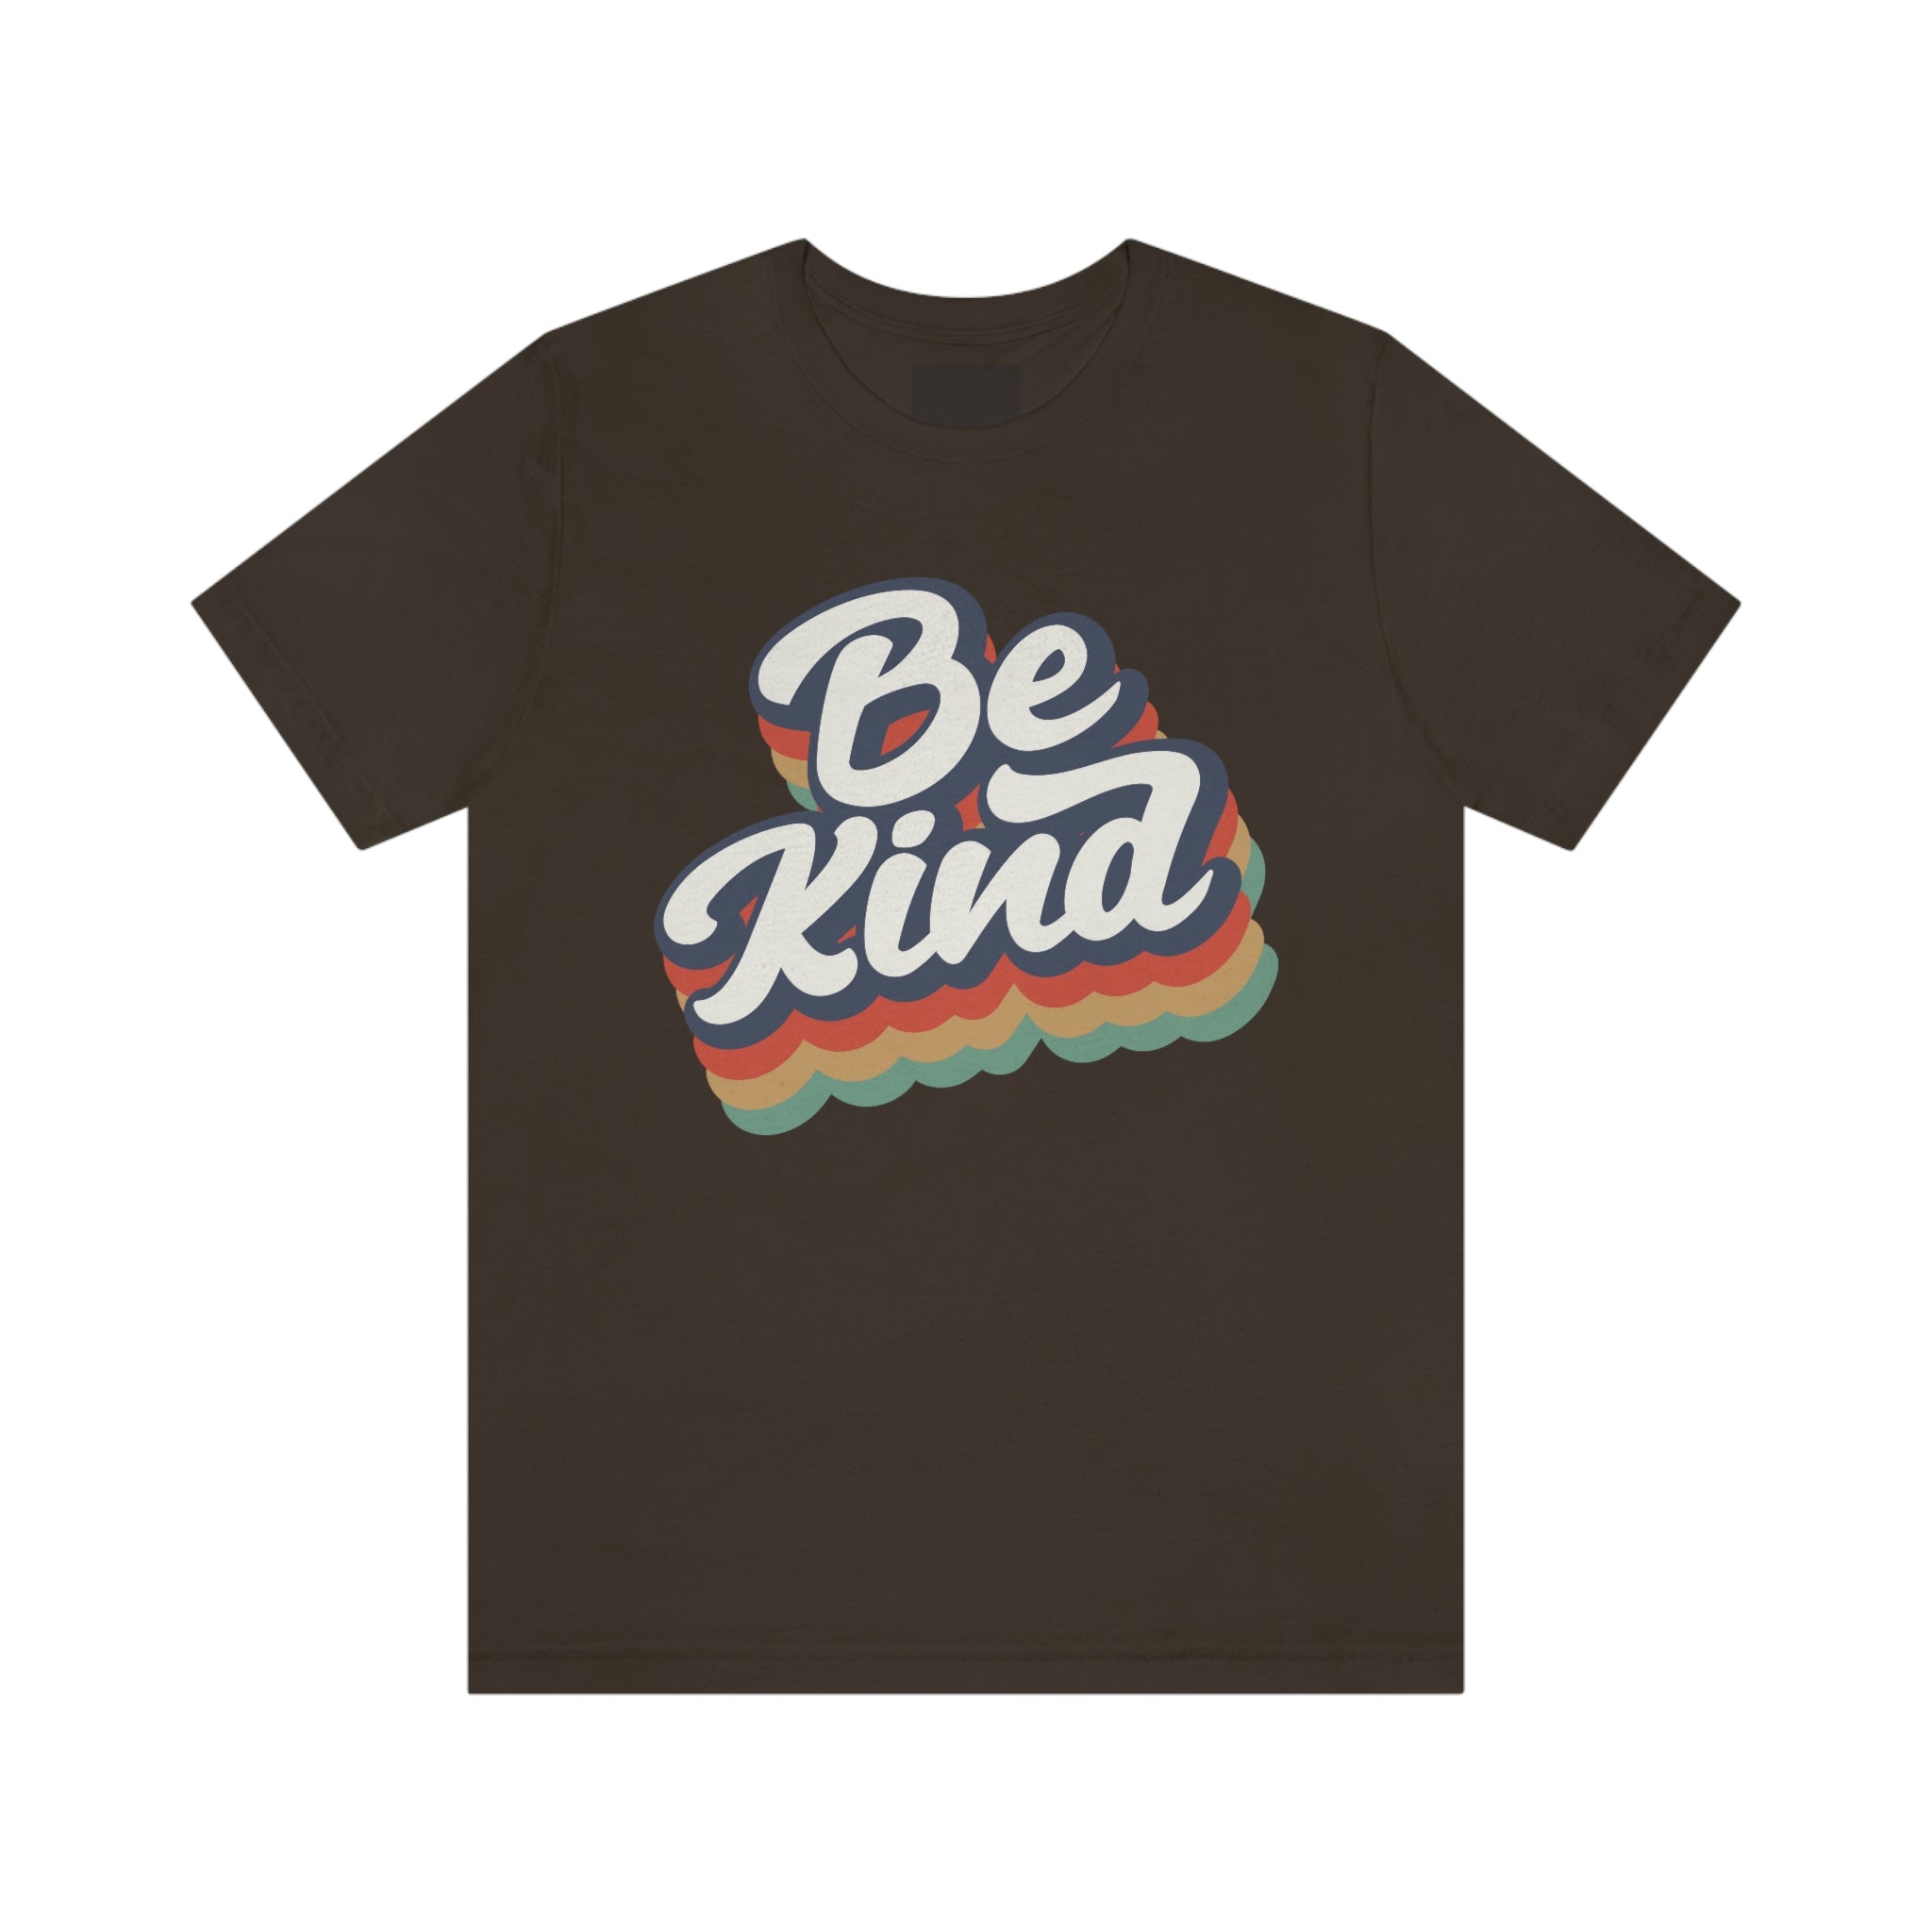 Kindness In The Front - Be Kind : Unisex 100% Premium Comfy Cotton, T-Shirt by Bella+Canvas